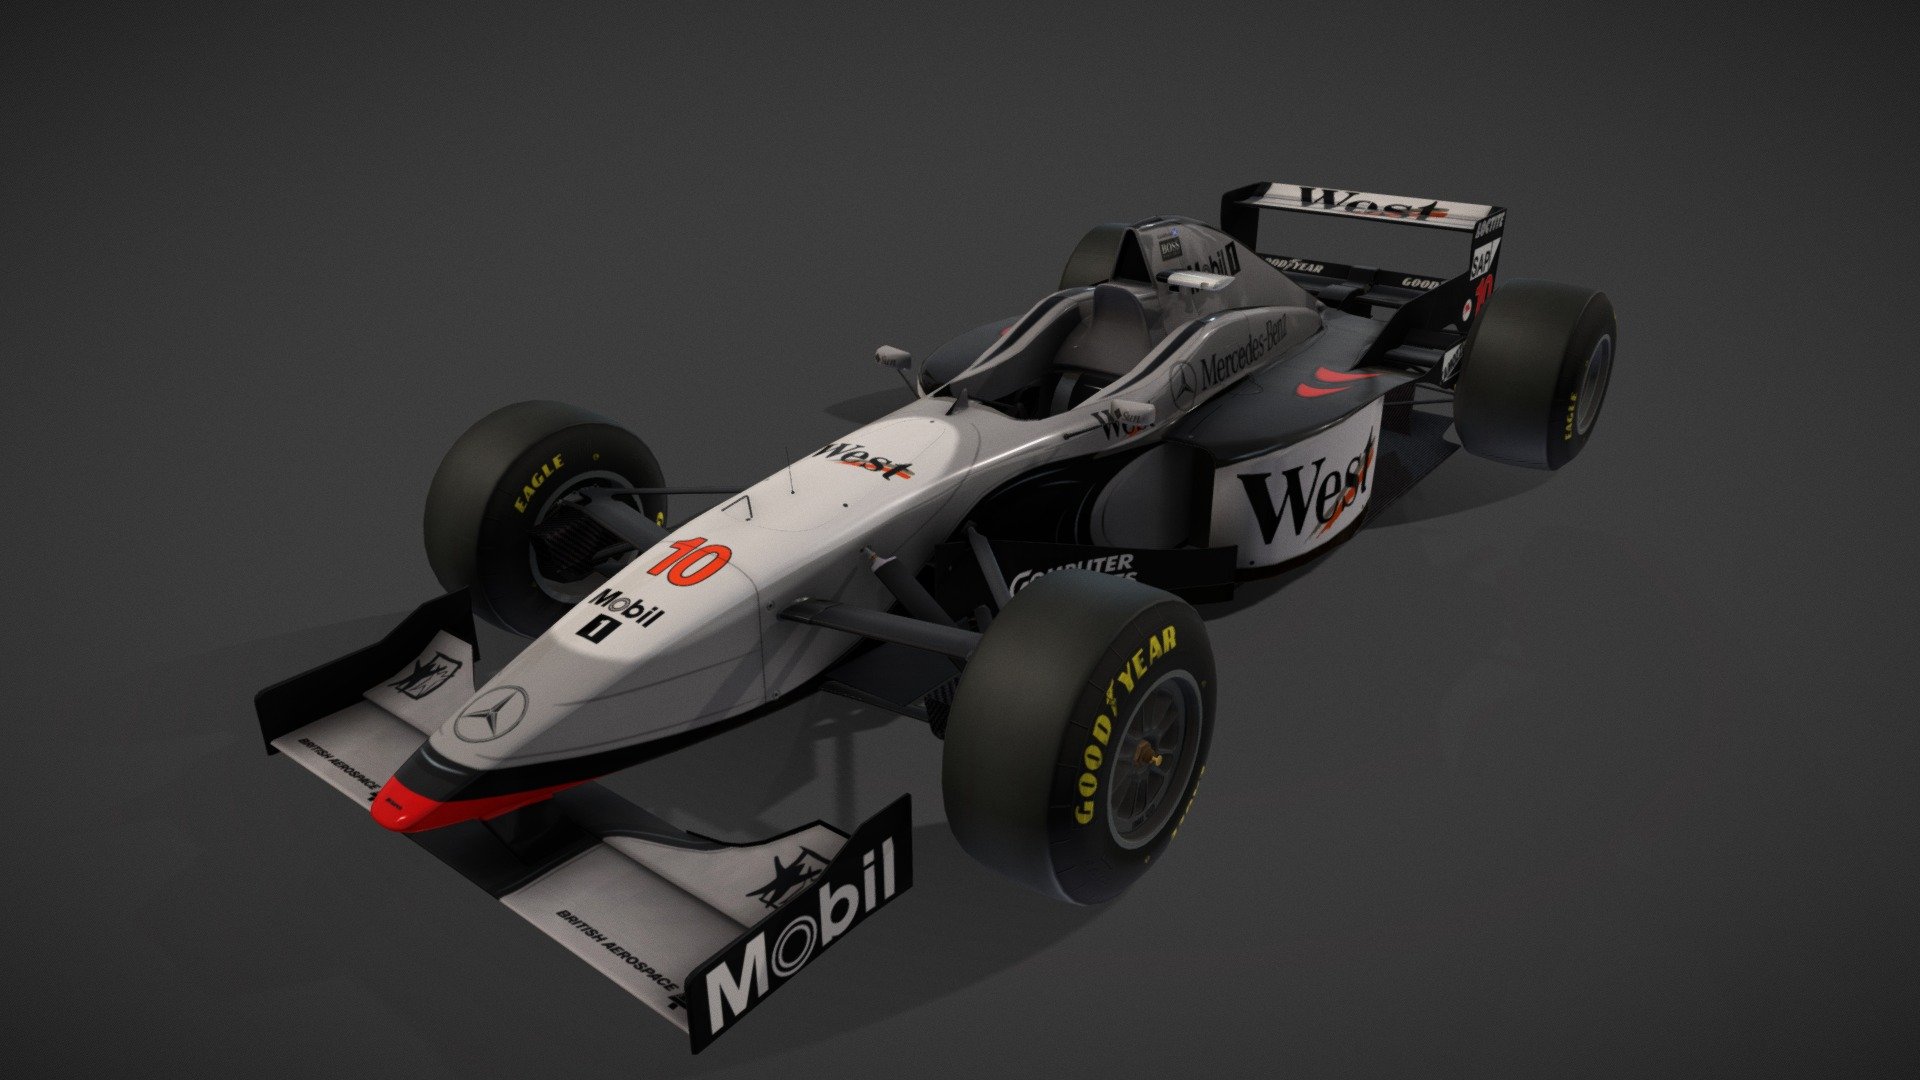 1997 McLaren Mp4-12 Formula one car.
Game model made for Grand Prix 4. Low downforce specification 3d model